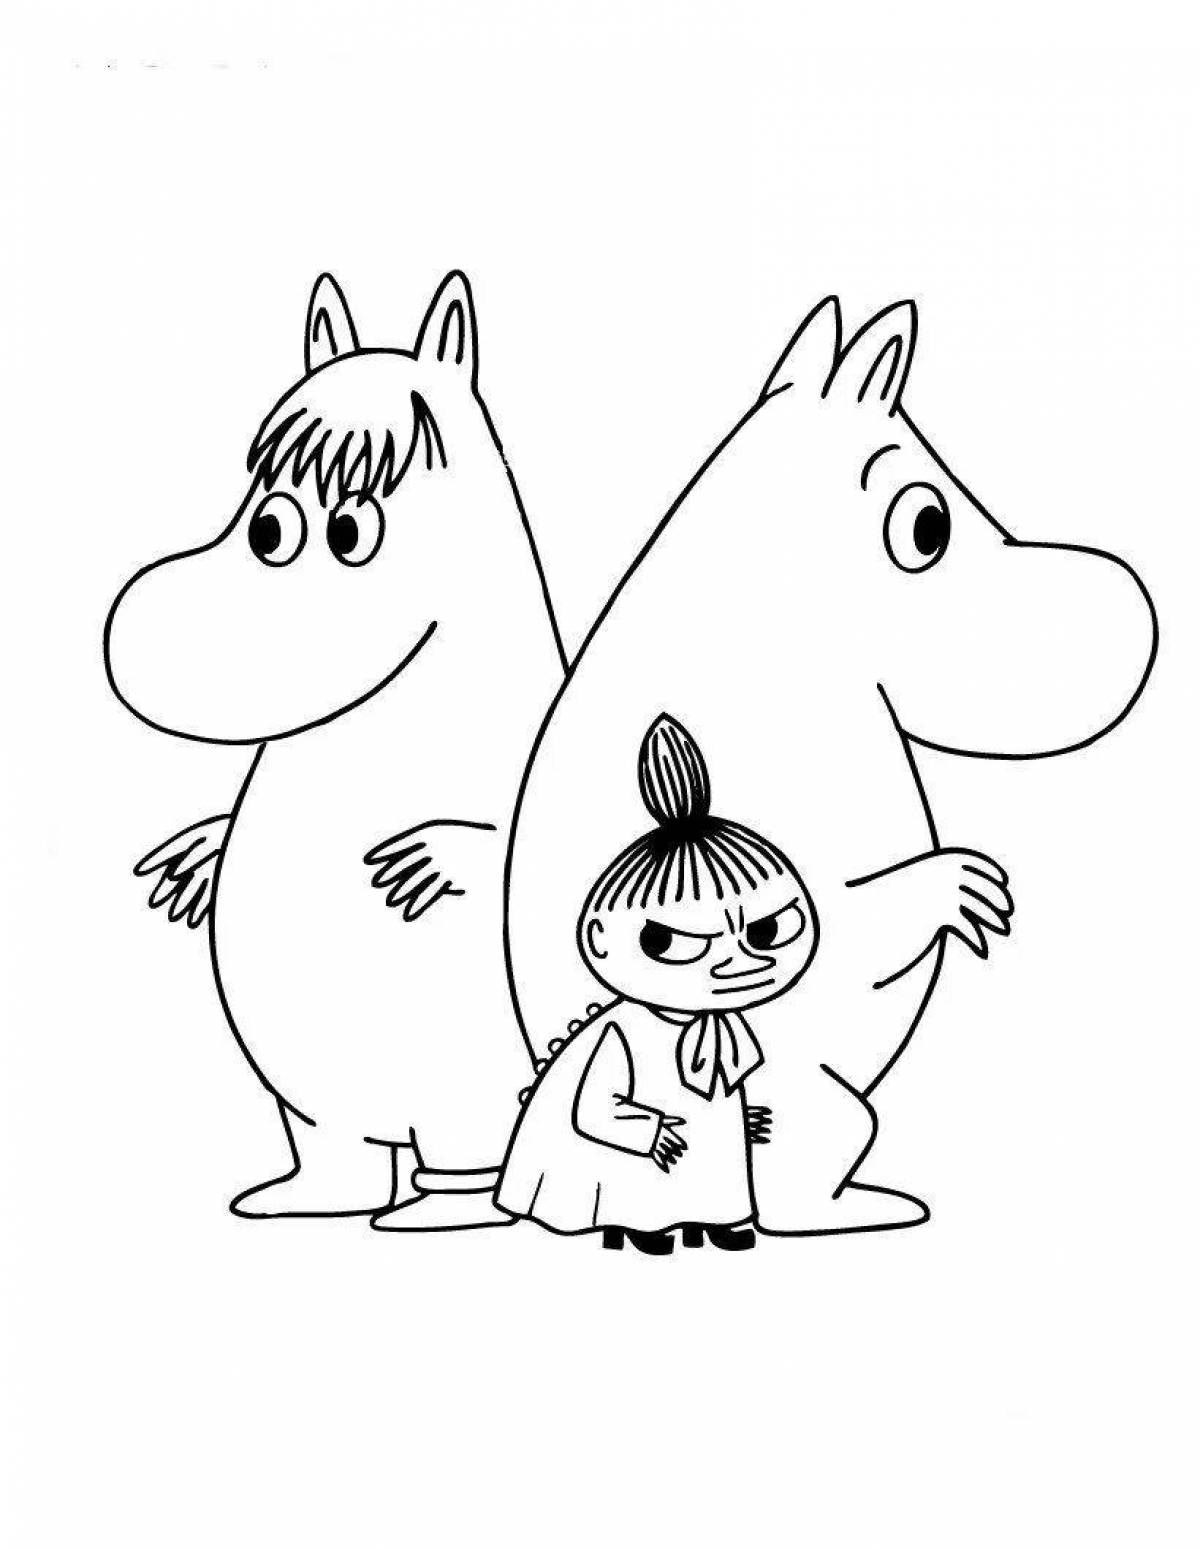 Exciting Moomin coloring book